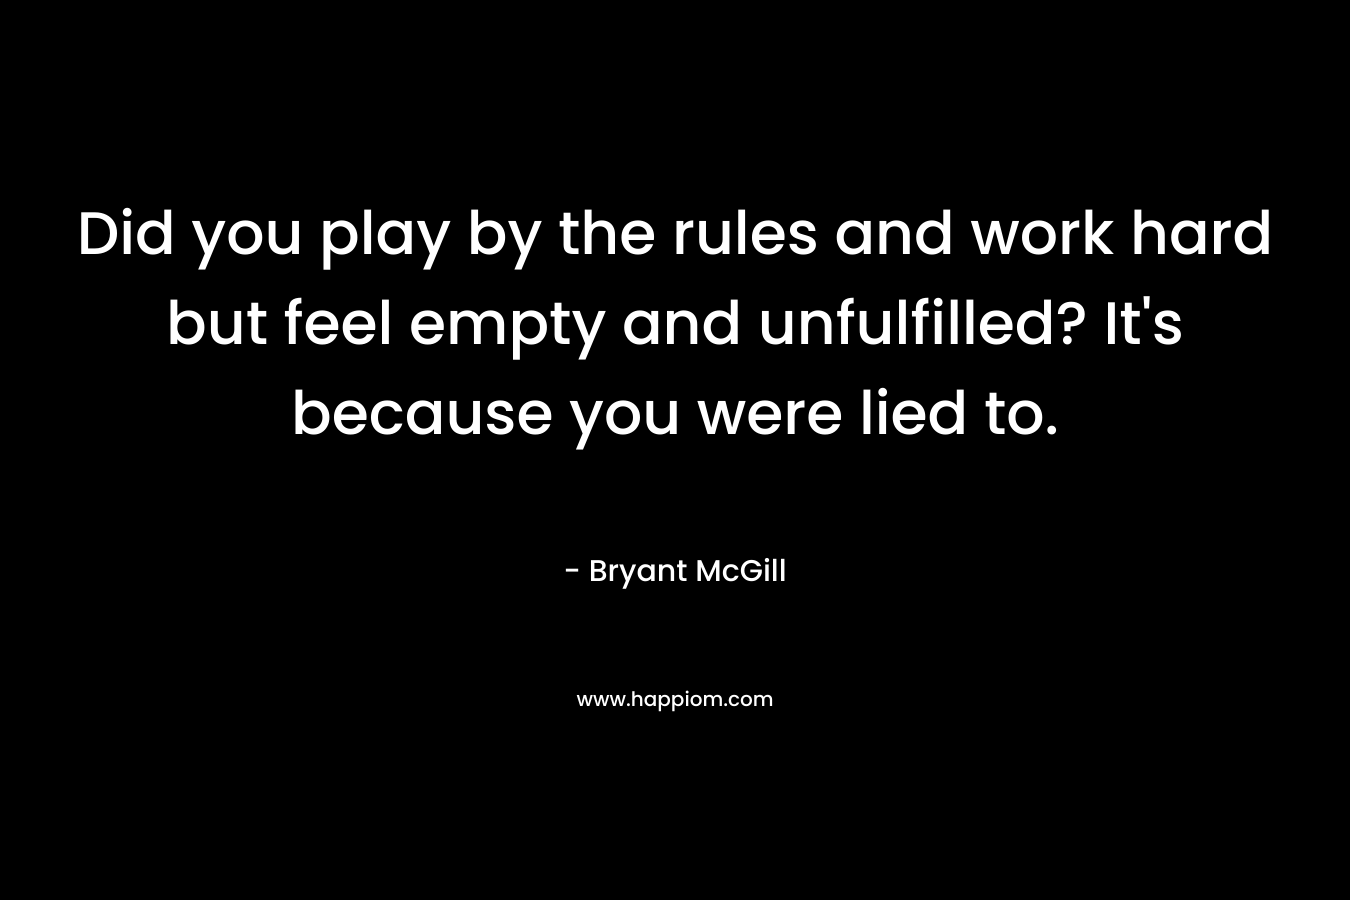 Did you play by the rules and work hard but feel empty and unfulfilled? It's because you were lied to.